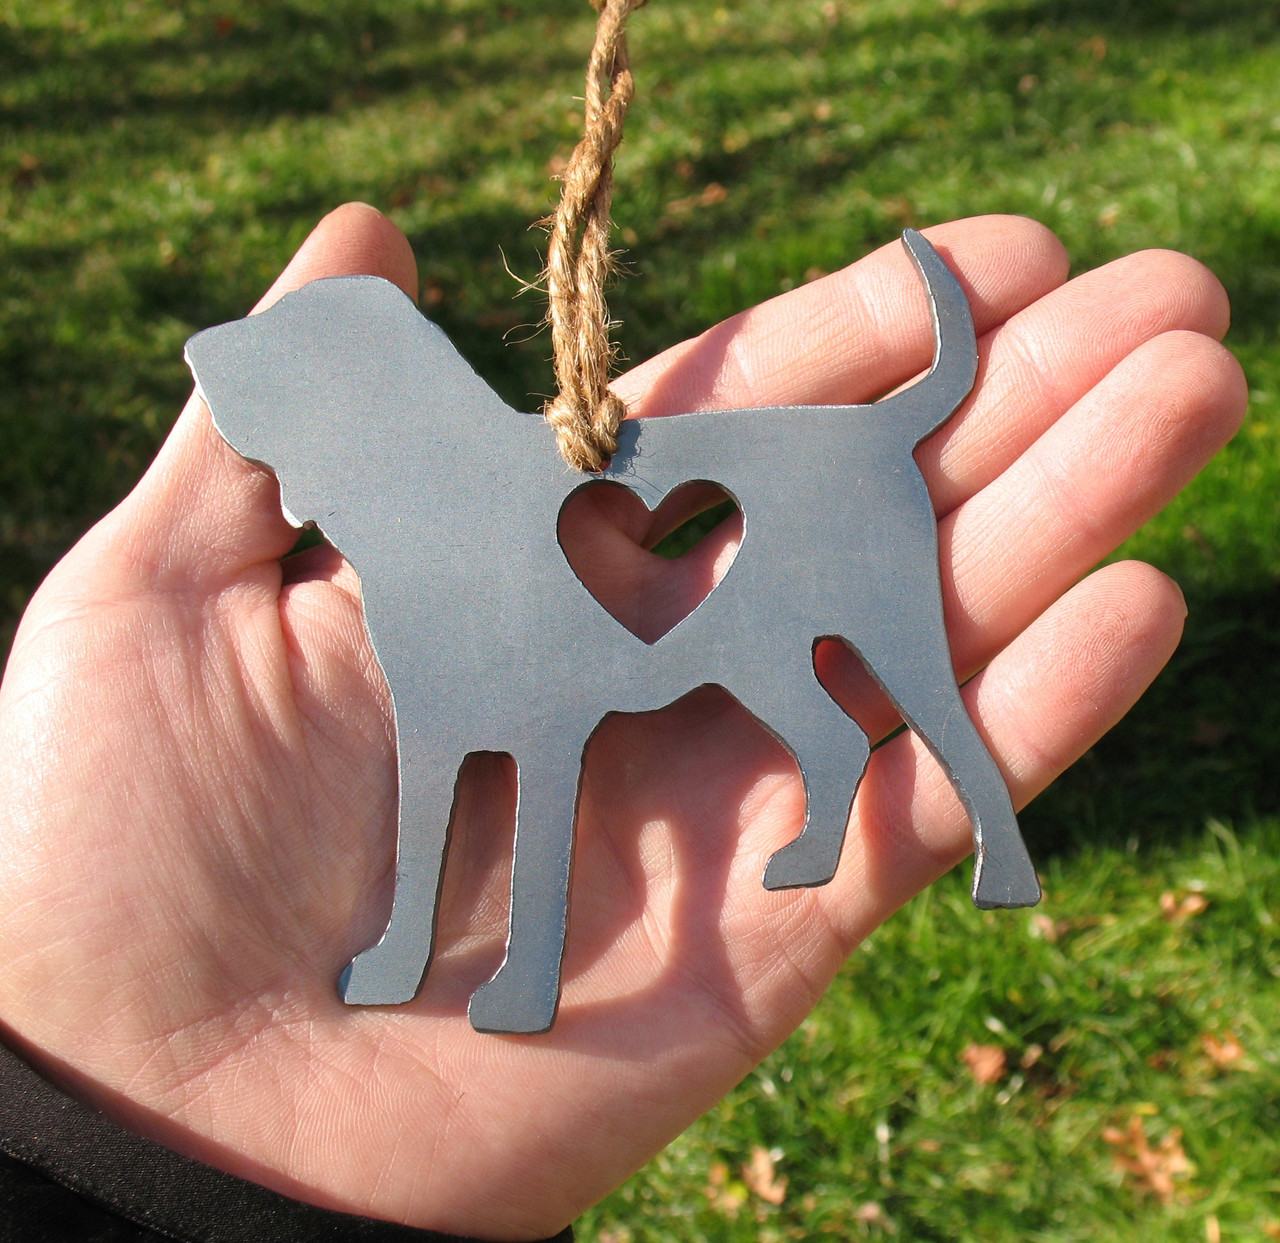 Bloodhound Dog Pet Loss Gift Ornament - Pet Memorial - Dog Sympathy Remembrance Gift - Metal Dog Christmas Ornament 